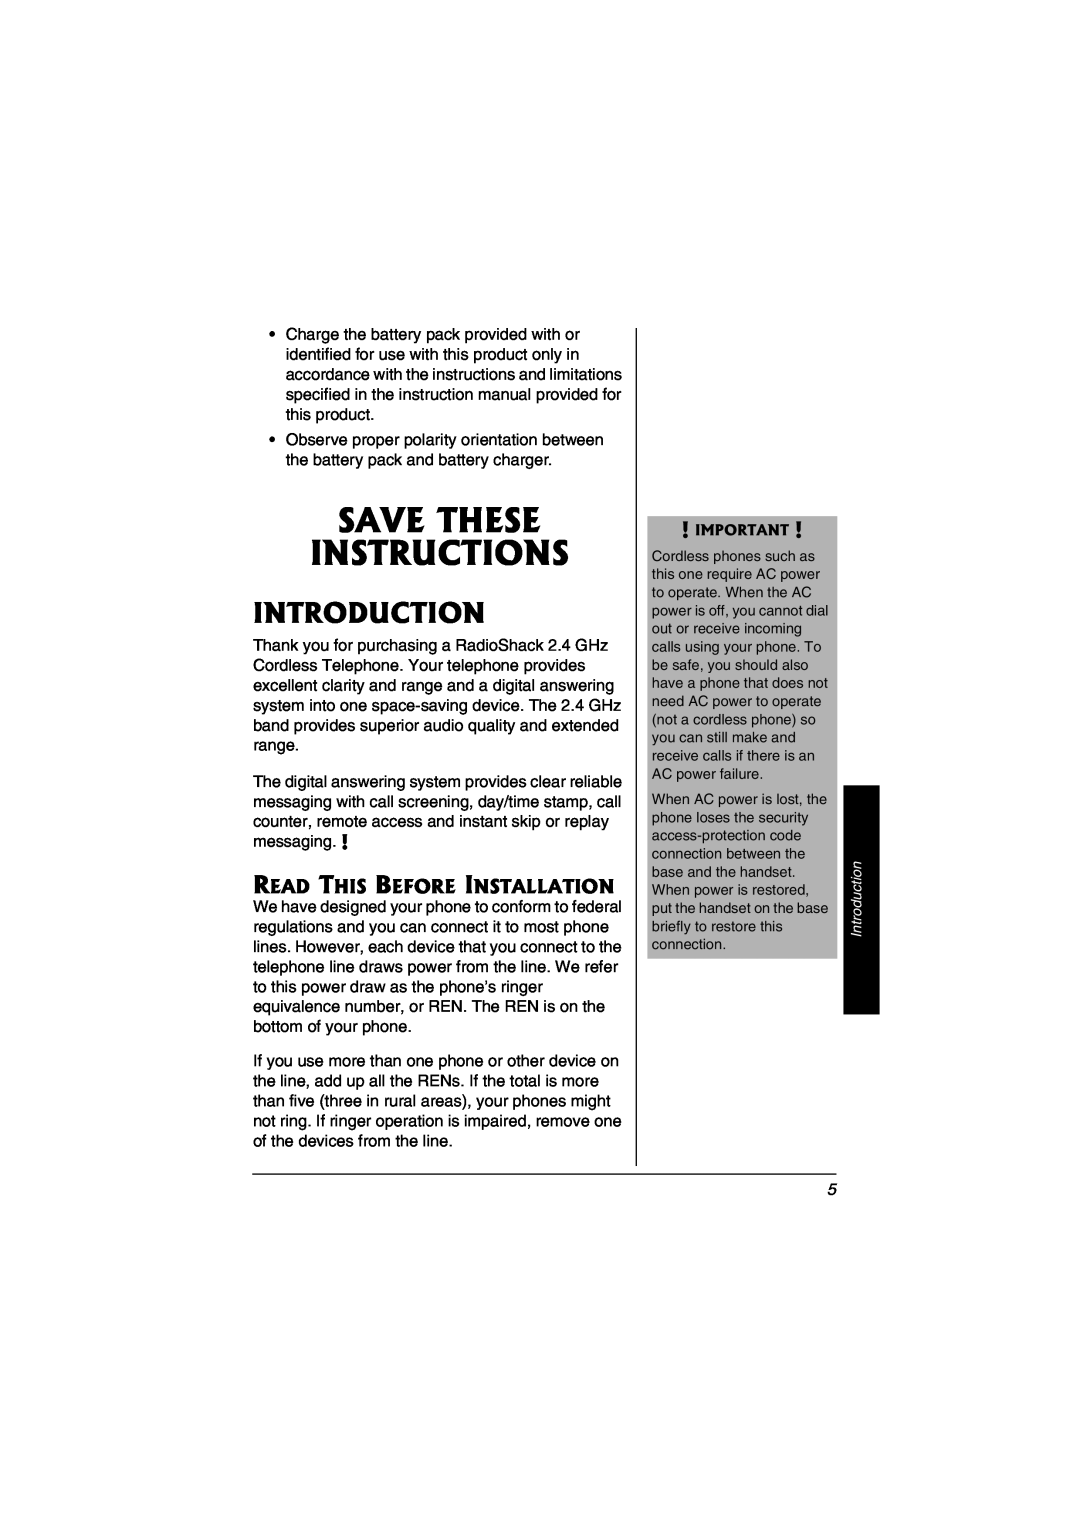 Radio Shack 43-3823 owner manual Introduction, Read This Before Installation, Save These Instructions 